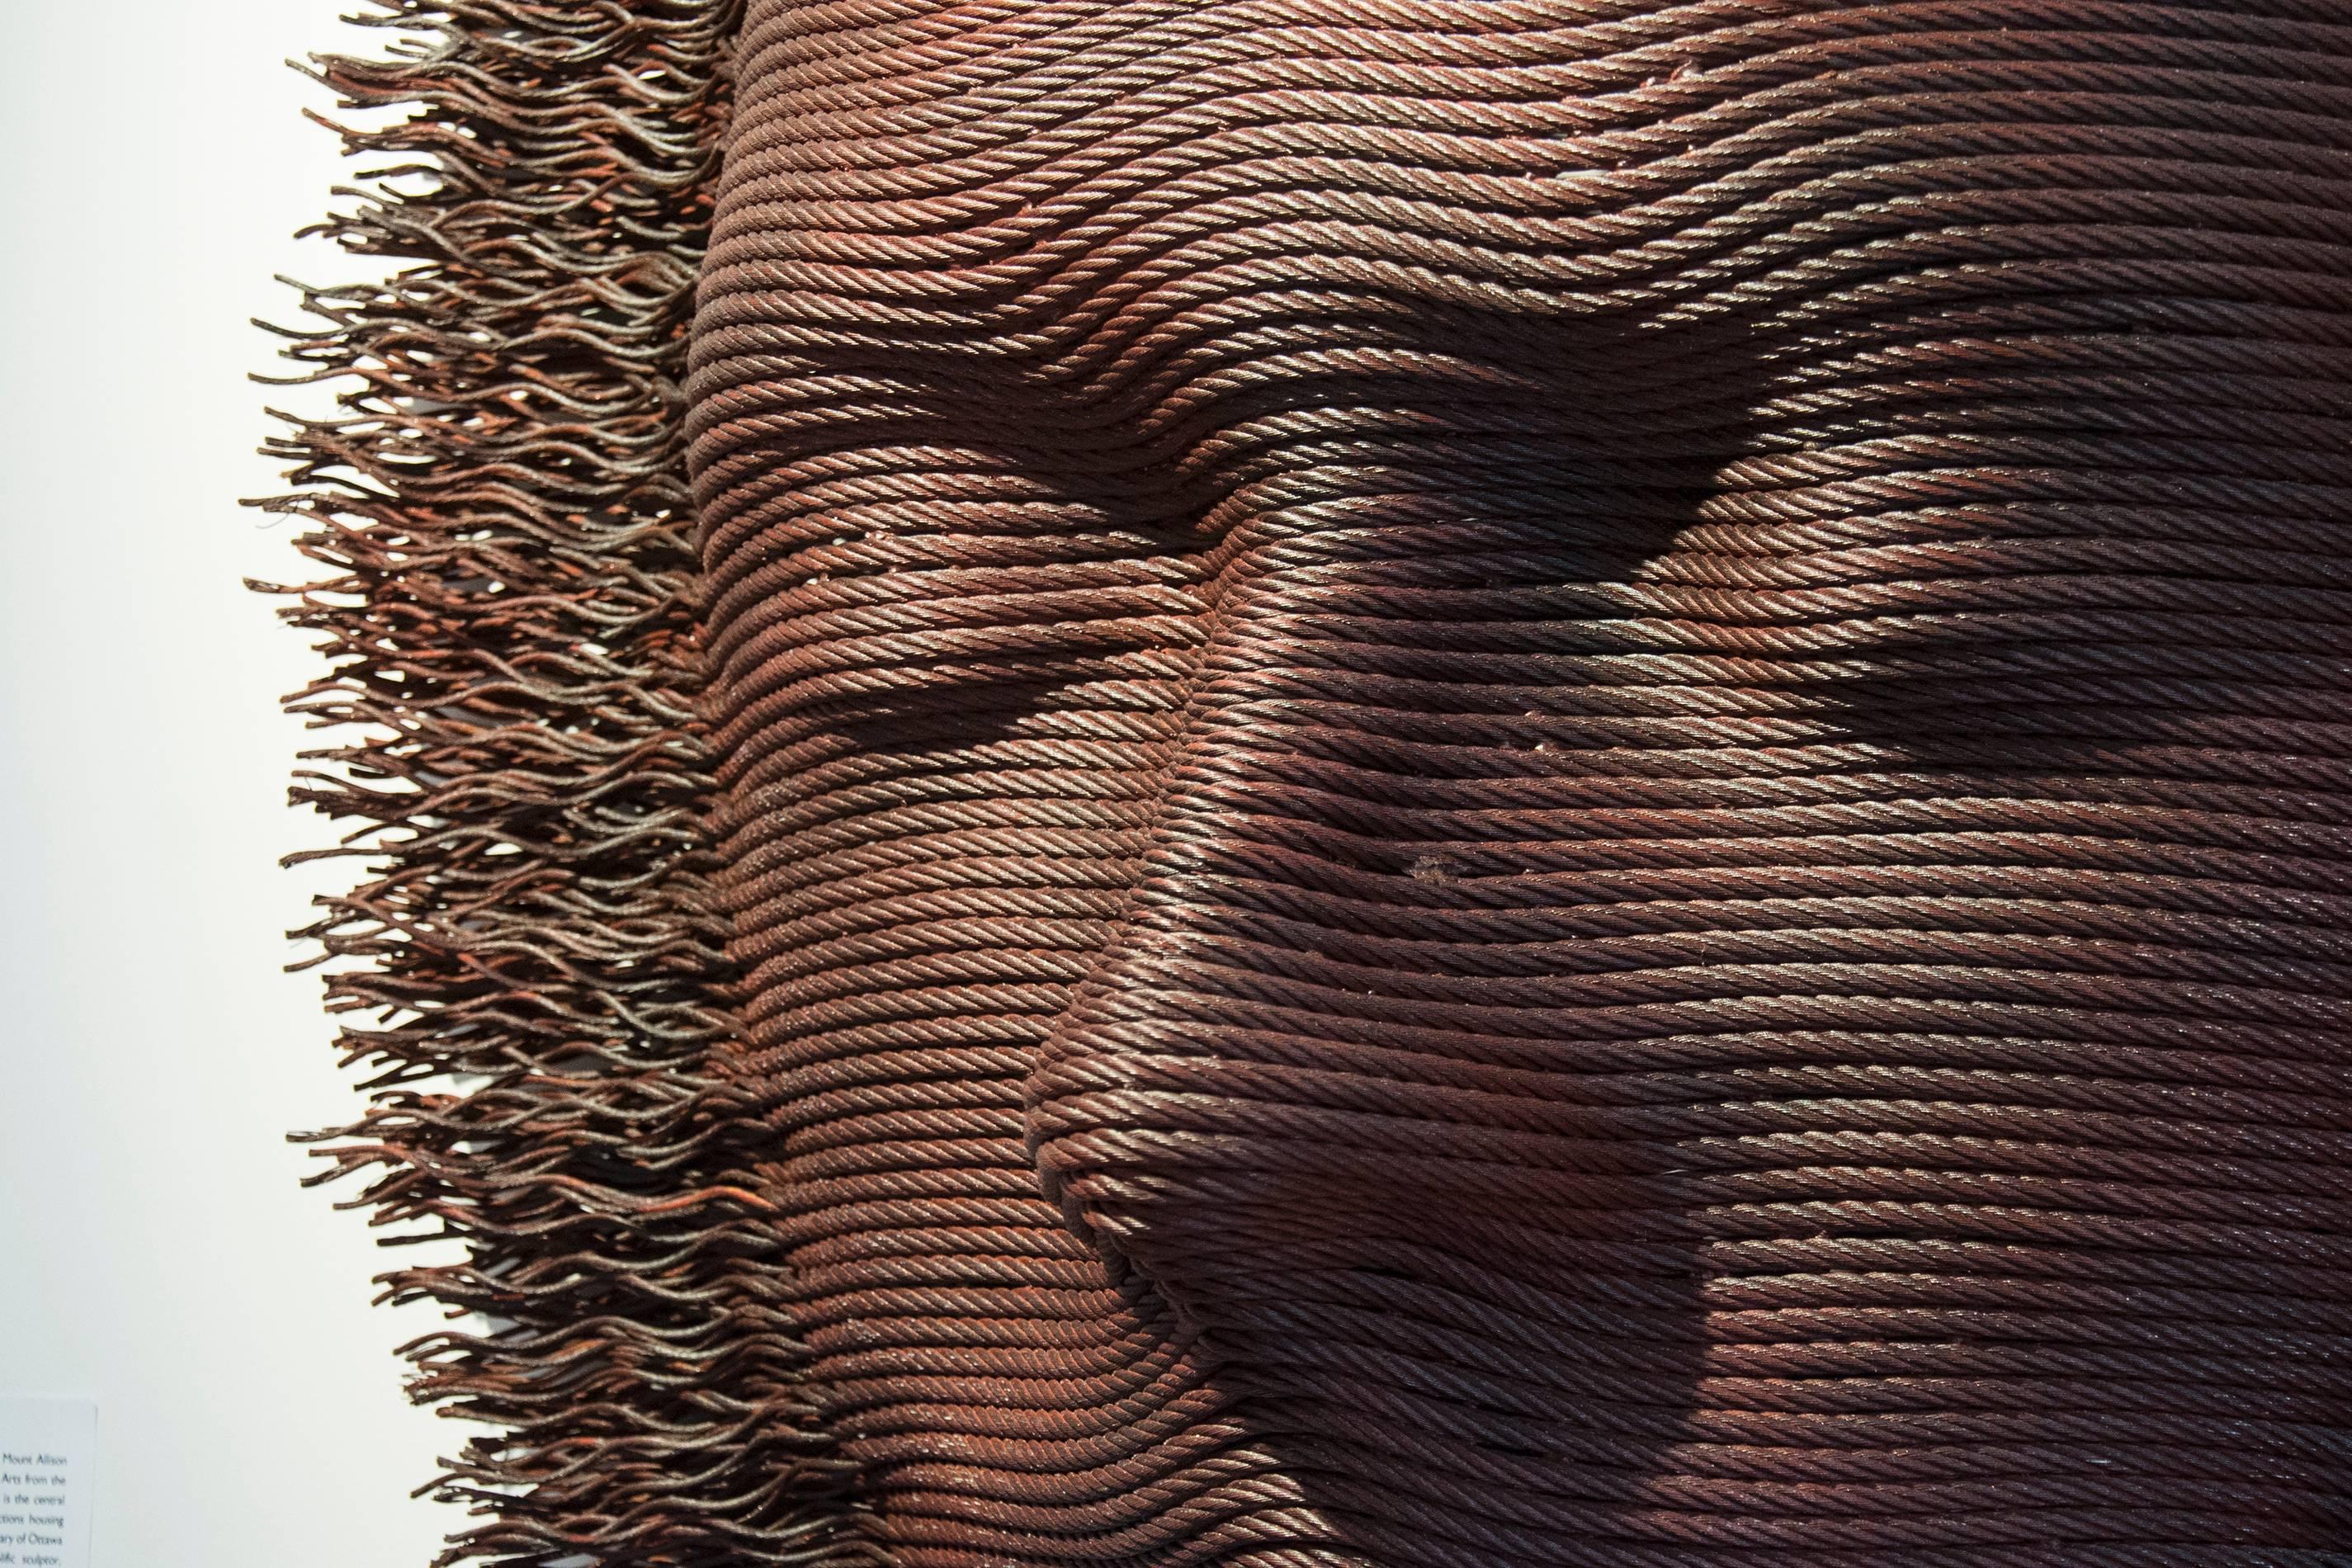 Wall hanging sculpture, created using steel cable. It is finished with a rich patina.

Sculptor Dale Dunning’s skilled craftsmanship never overshadows the story he wants to tell. Often he presents new ways of looking at the human face – sometimes